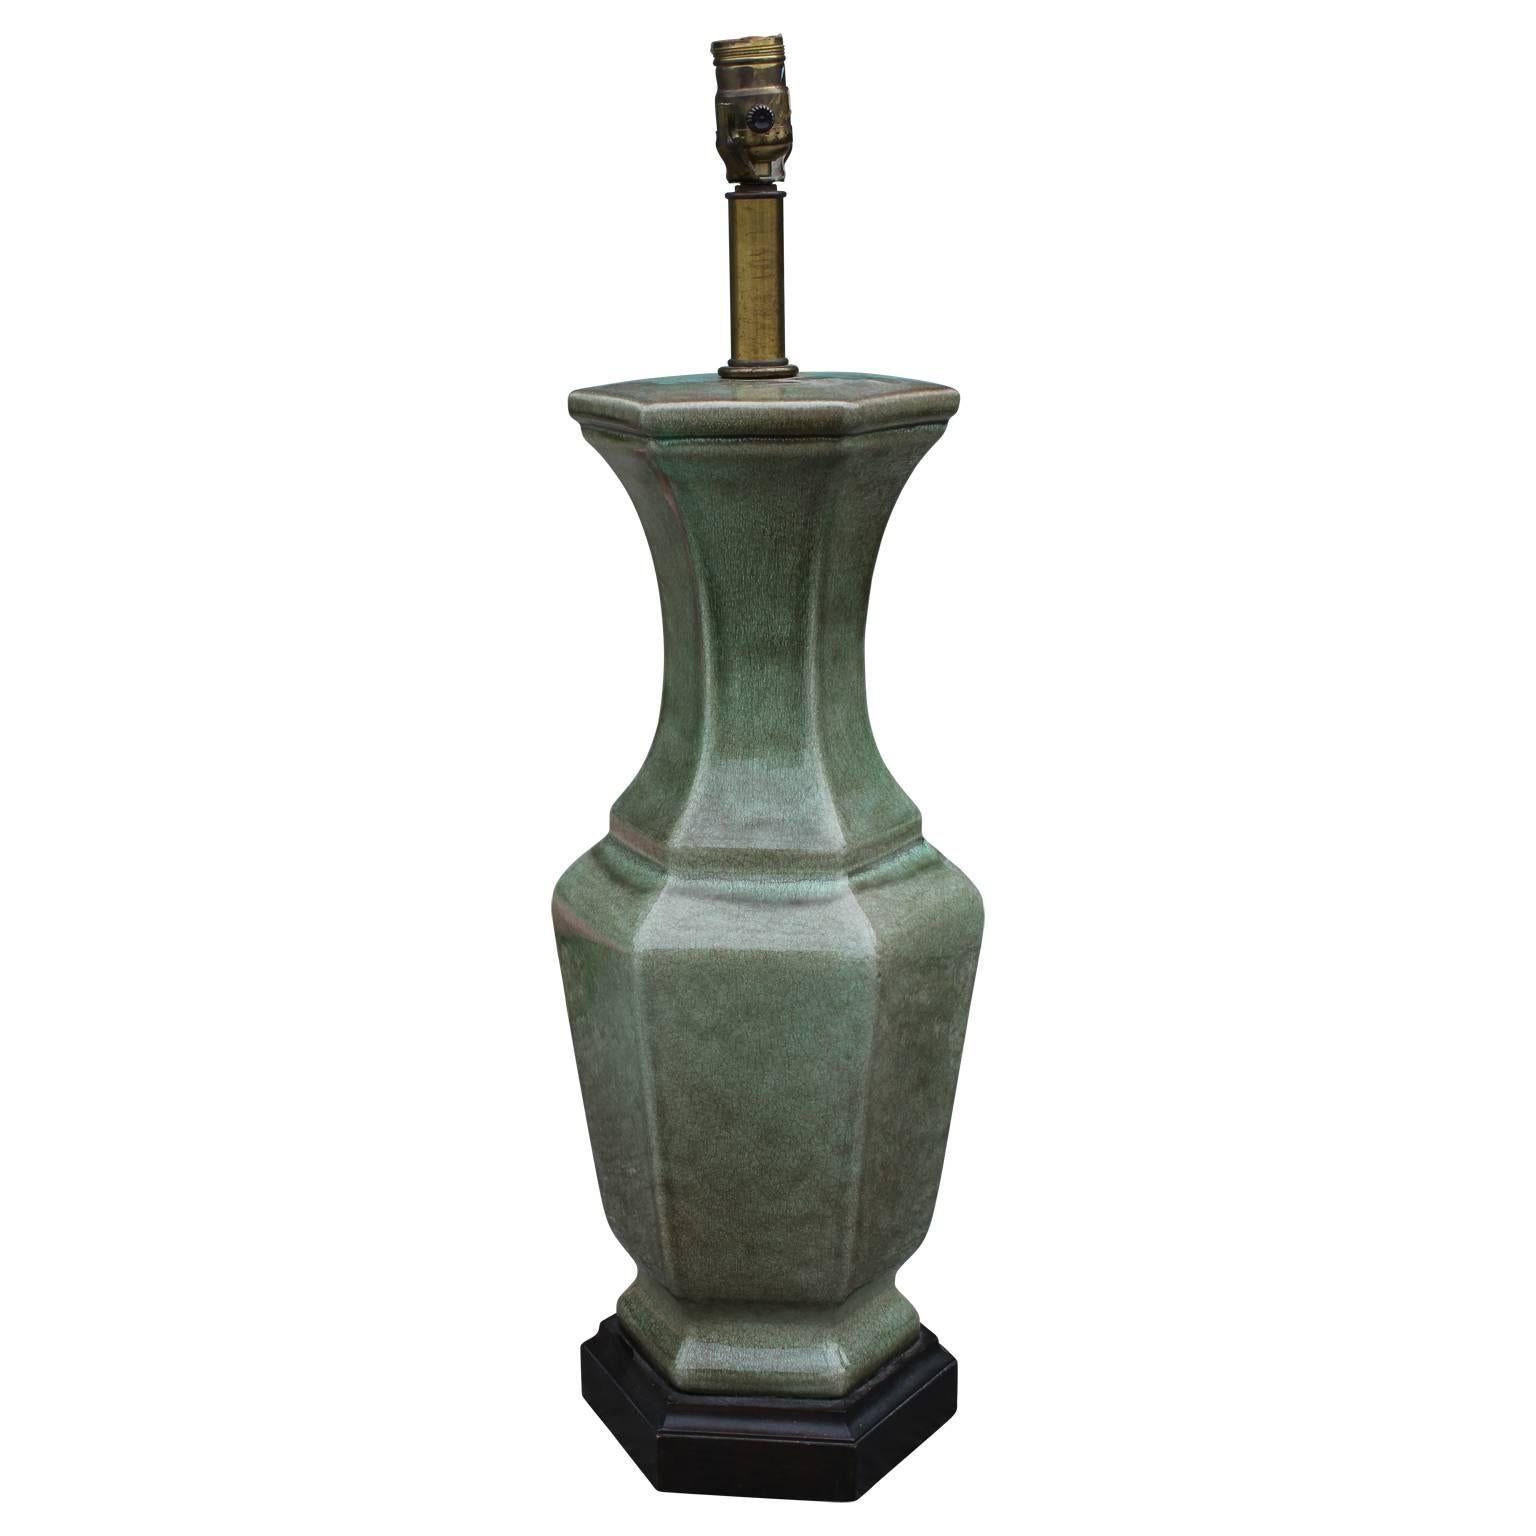 Pair of Frederick Cooper green glazed ceramic vase table lamps. Originally made in Chicago, IL. 